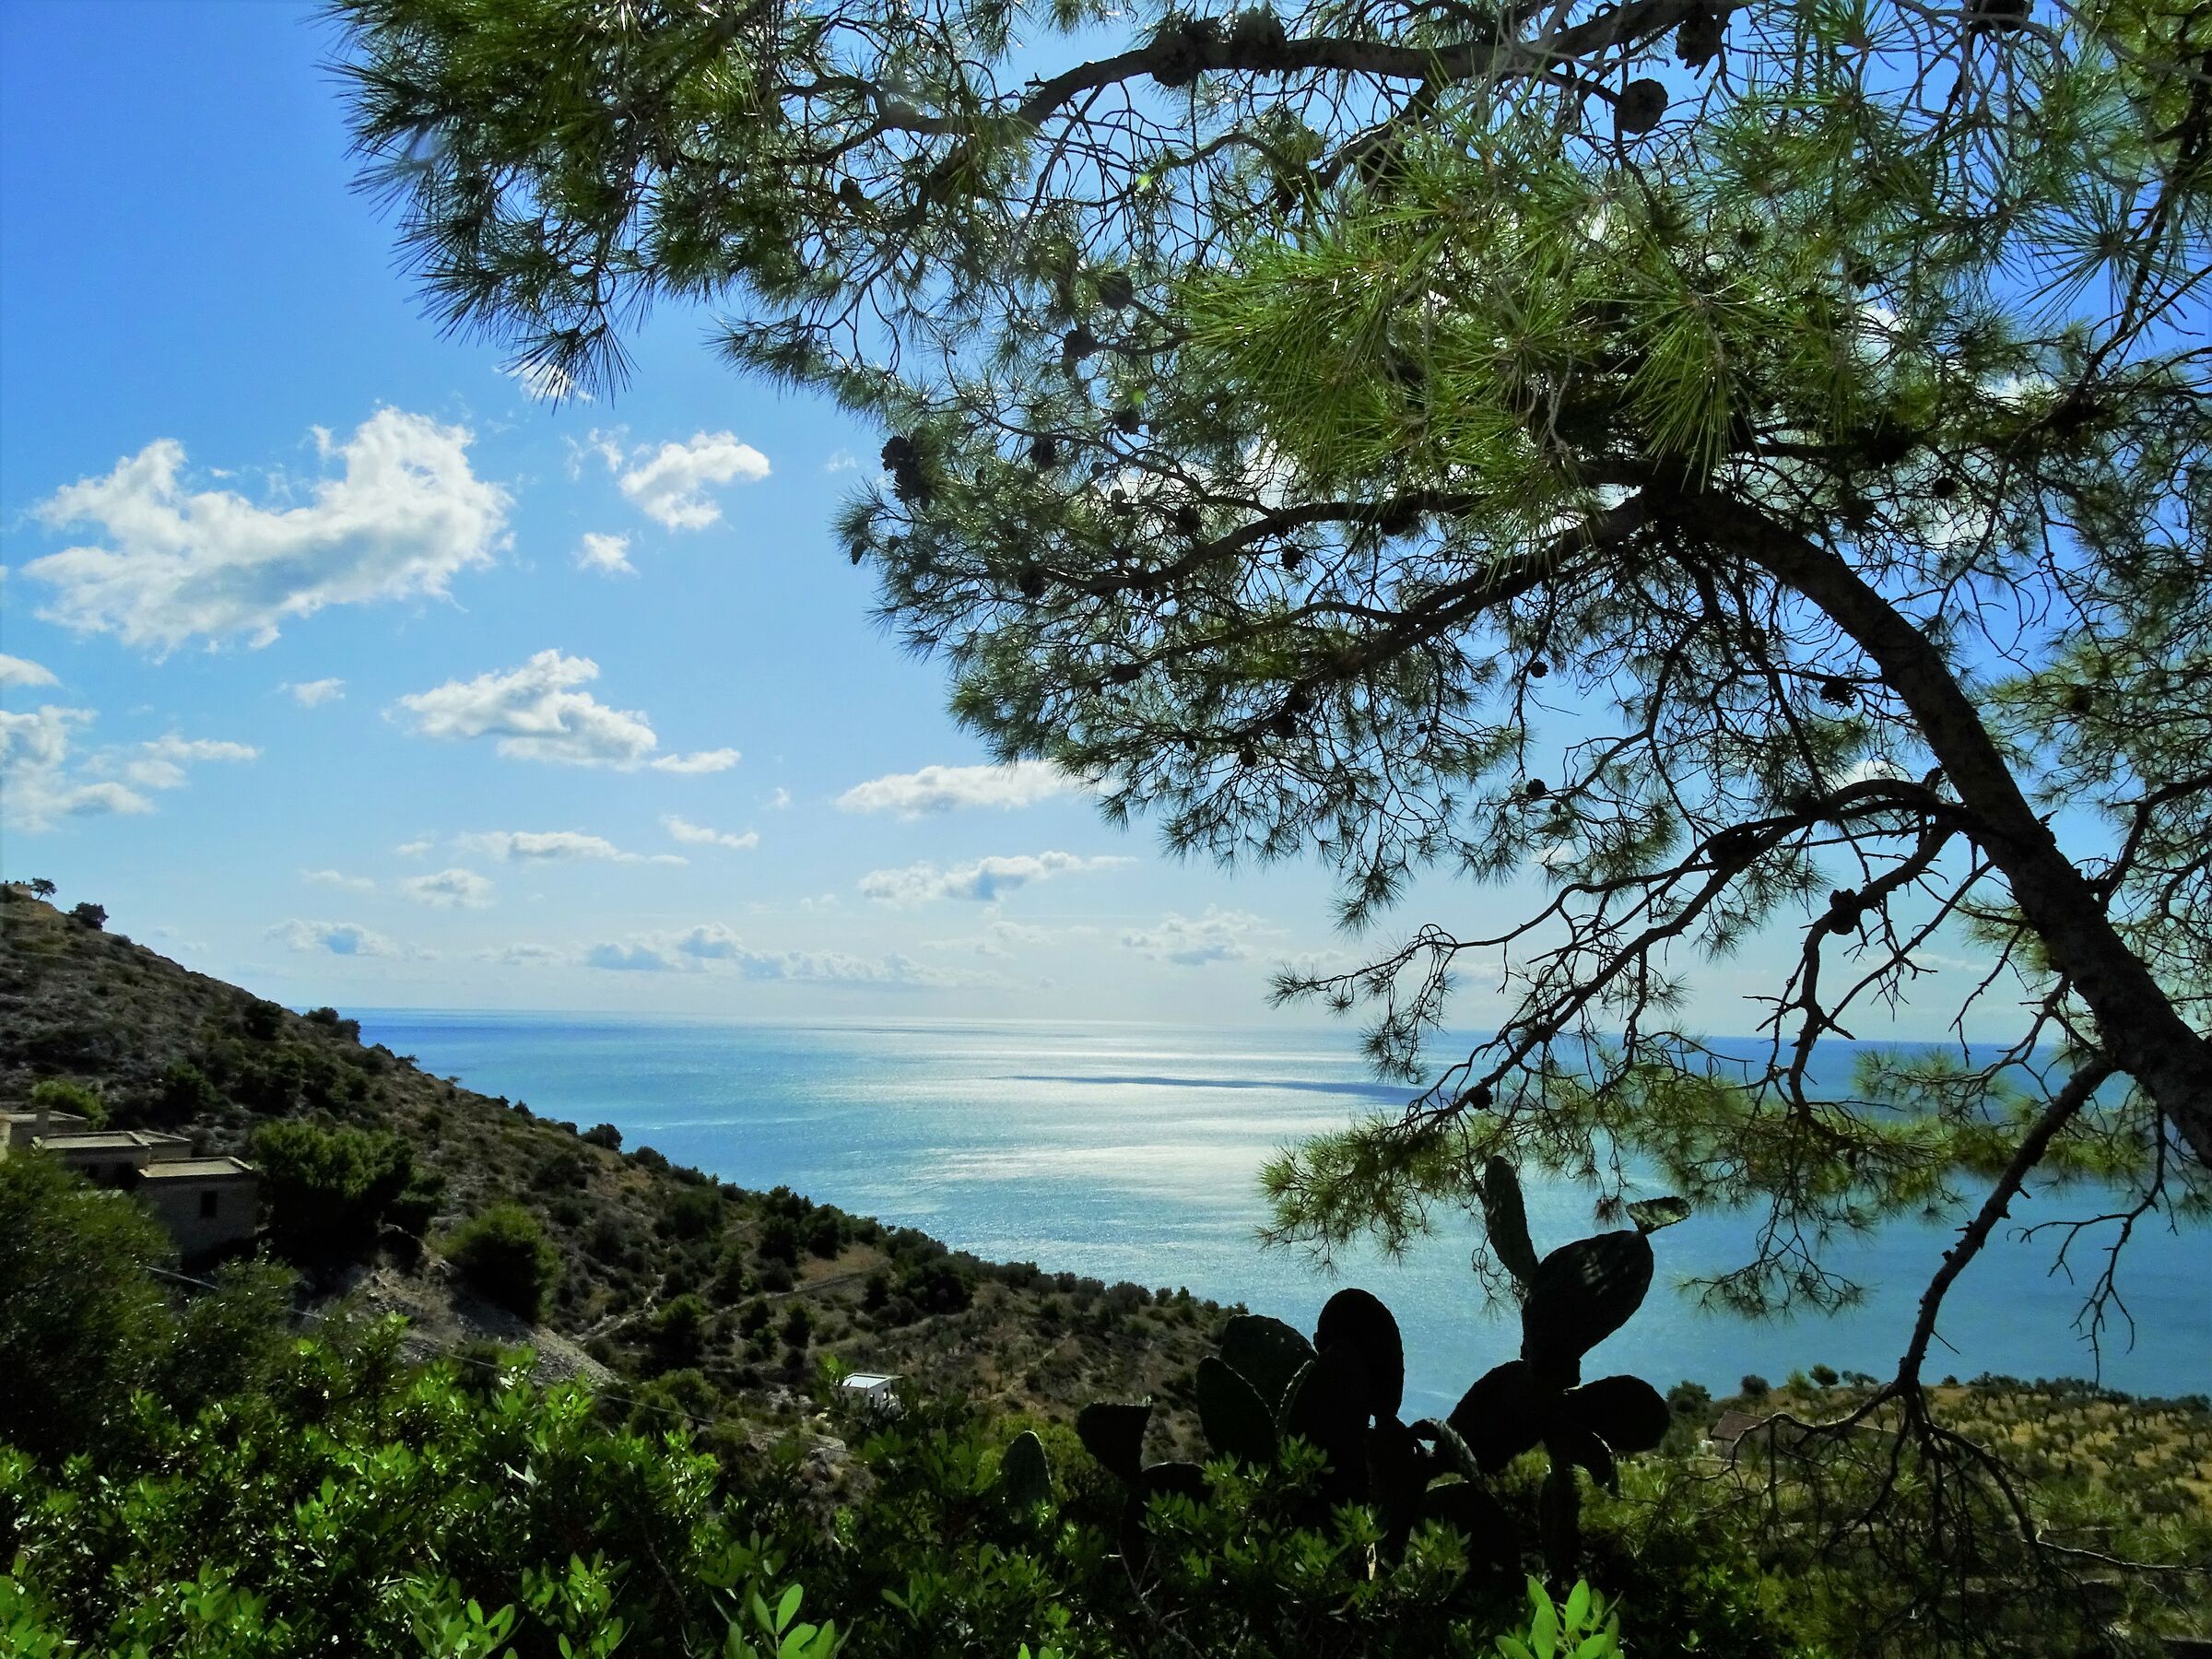 A glimpse of the Gargano...